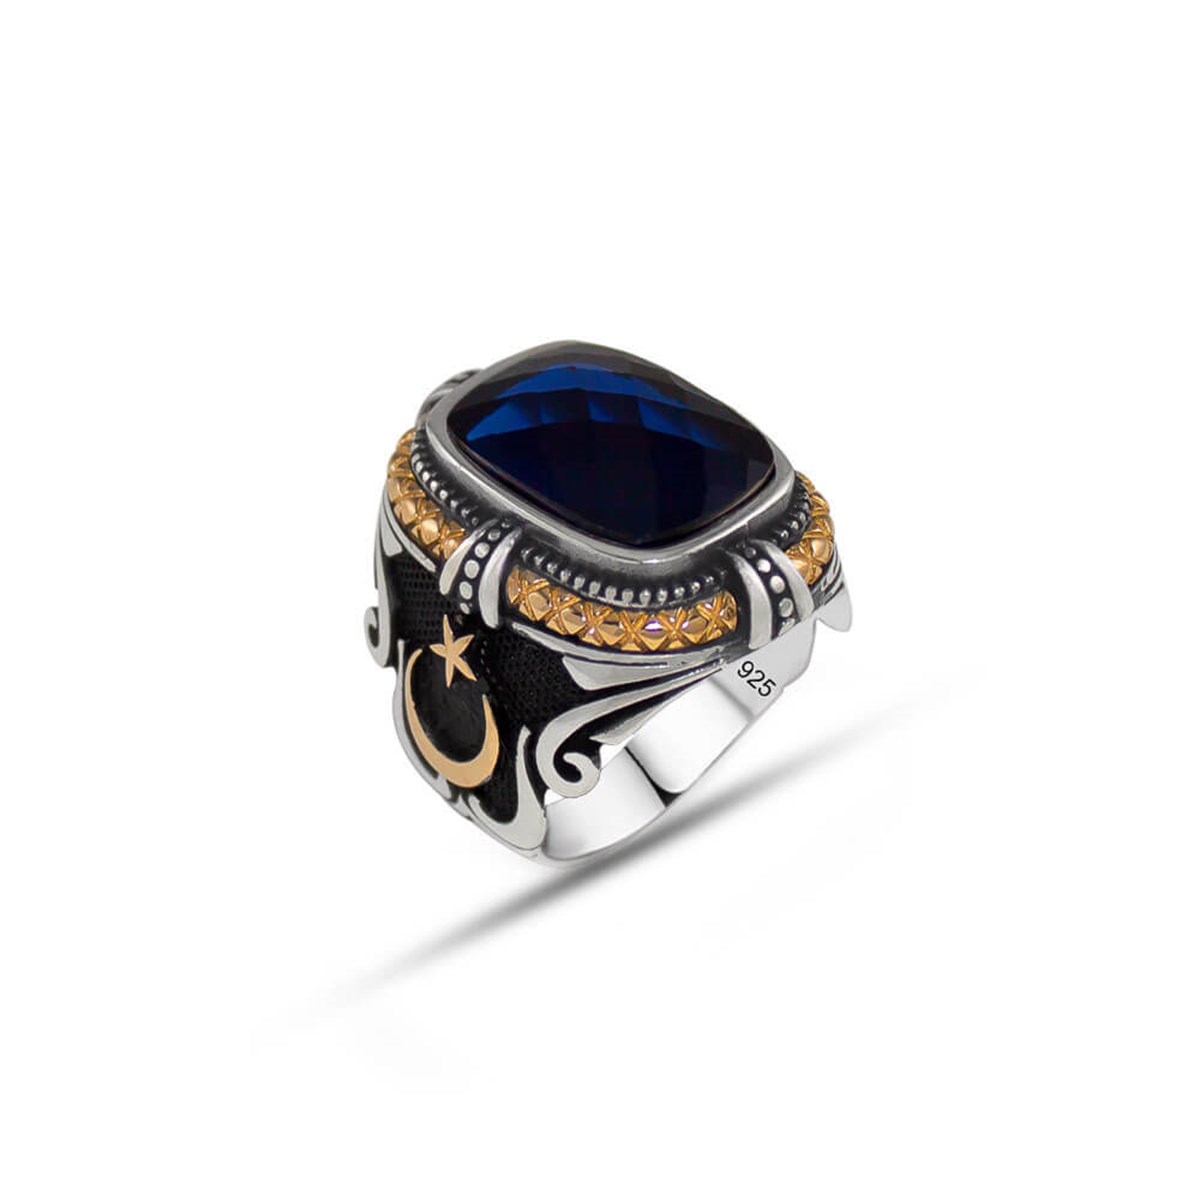 Navy Blue Facet Stone Oxide Tugra Sterling Silver Men's Ring